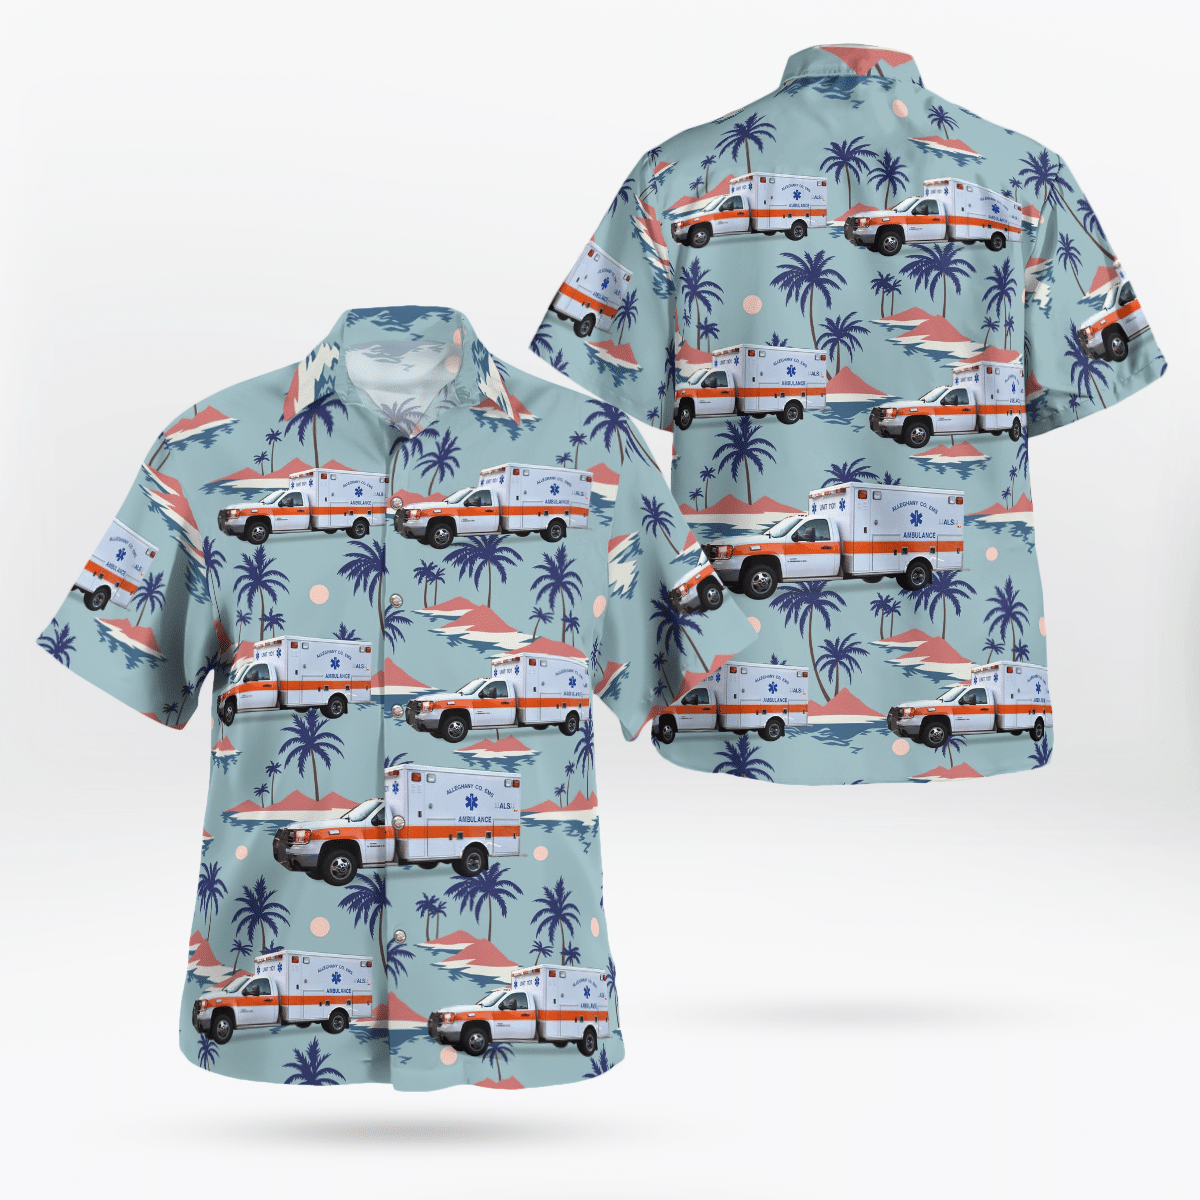 If you want to be noticed, wear These Trendy Hawaiian Shirt 113